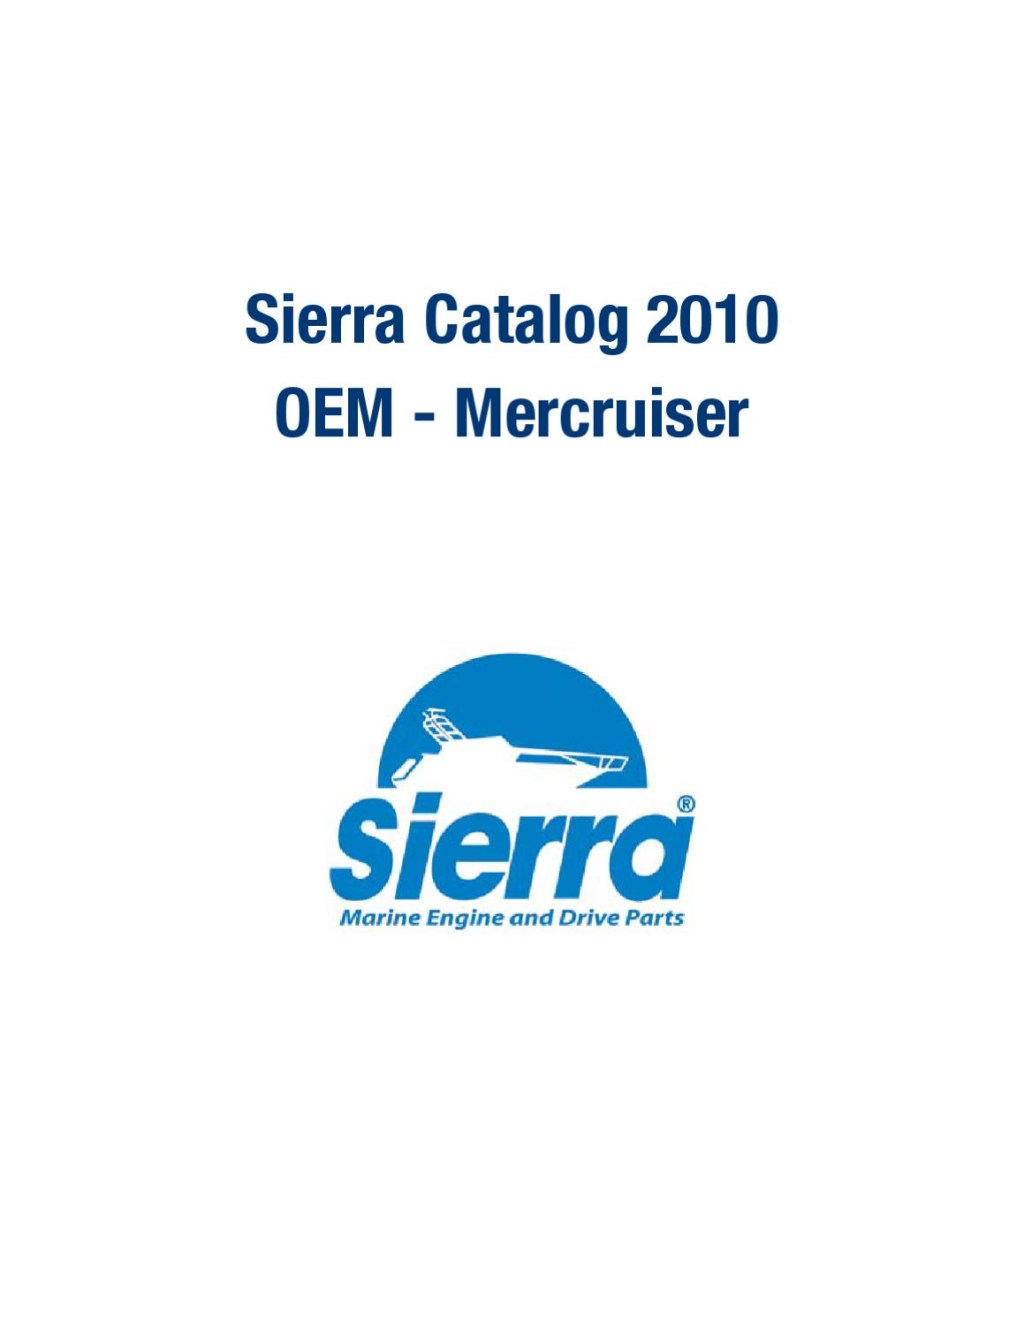 Picture of: Sierra Marine Engine and Drive Parts for Mercruiser I/O